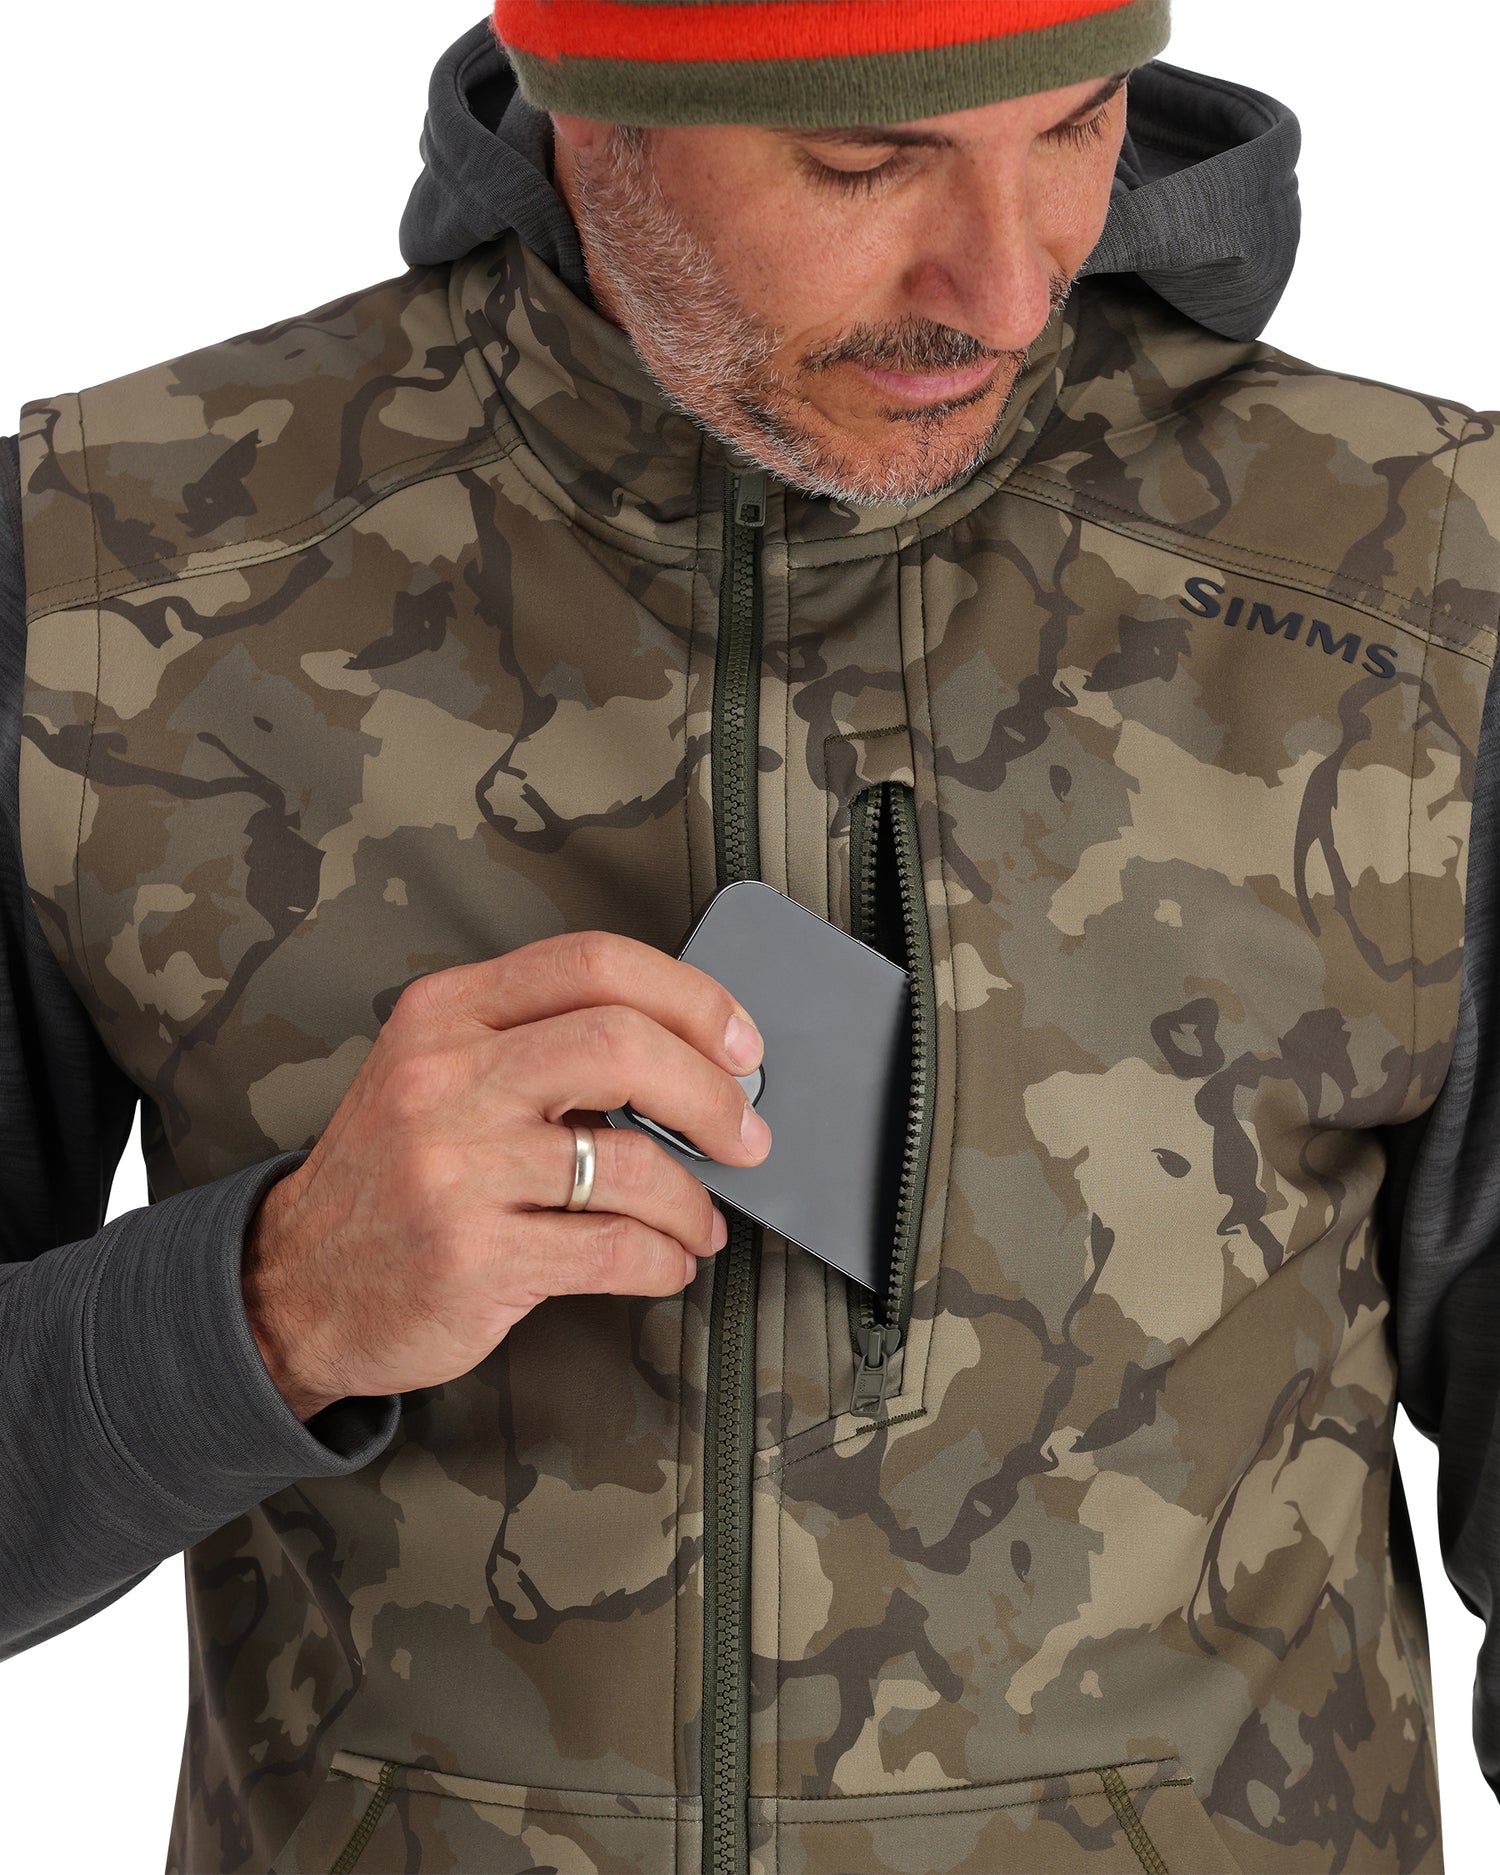 M's Rogue Fleece Vest | Simms Fishing Products